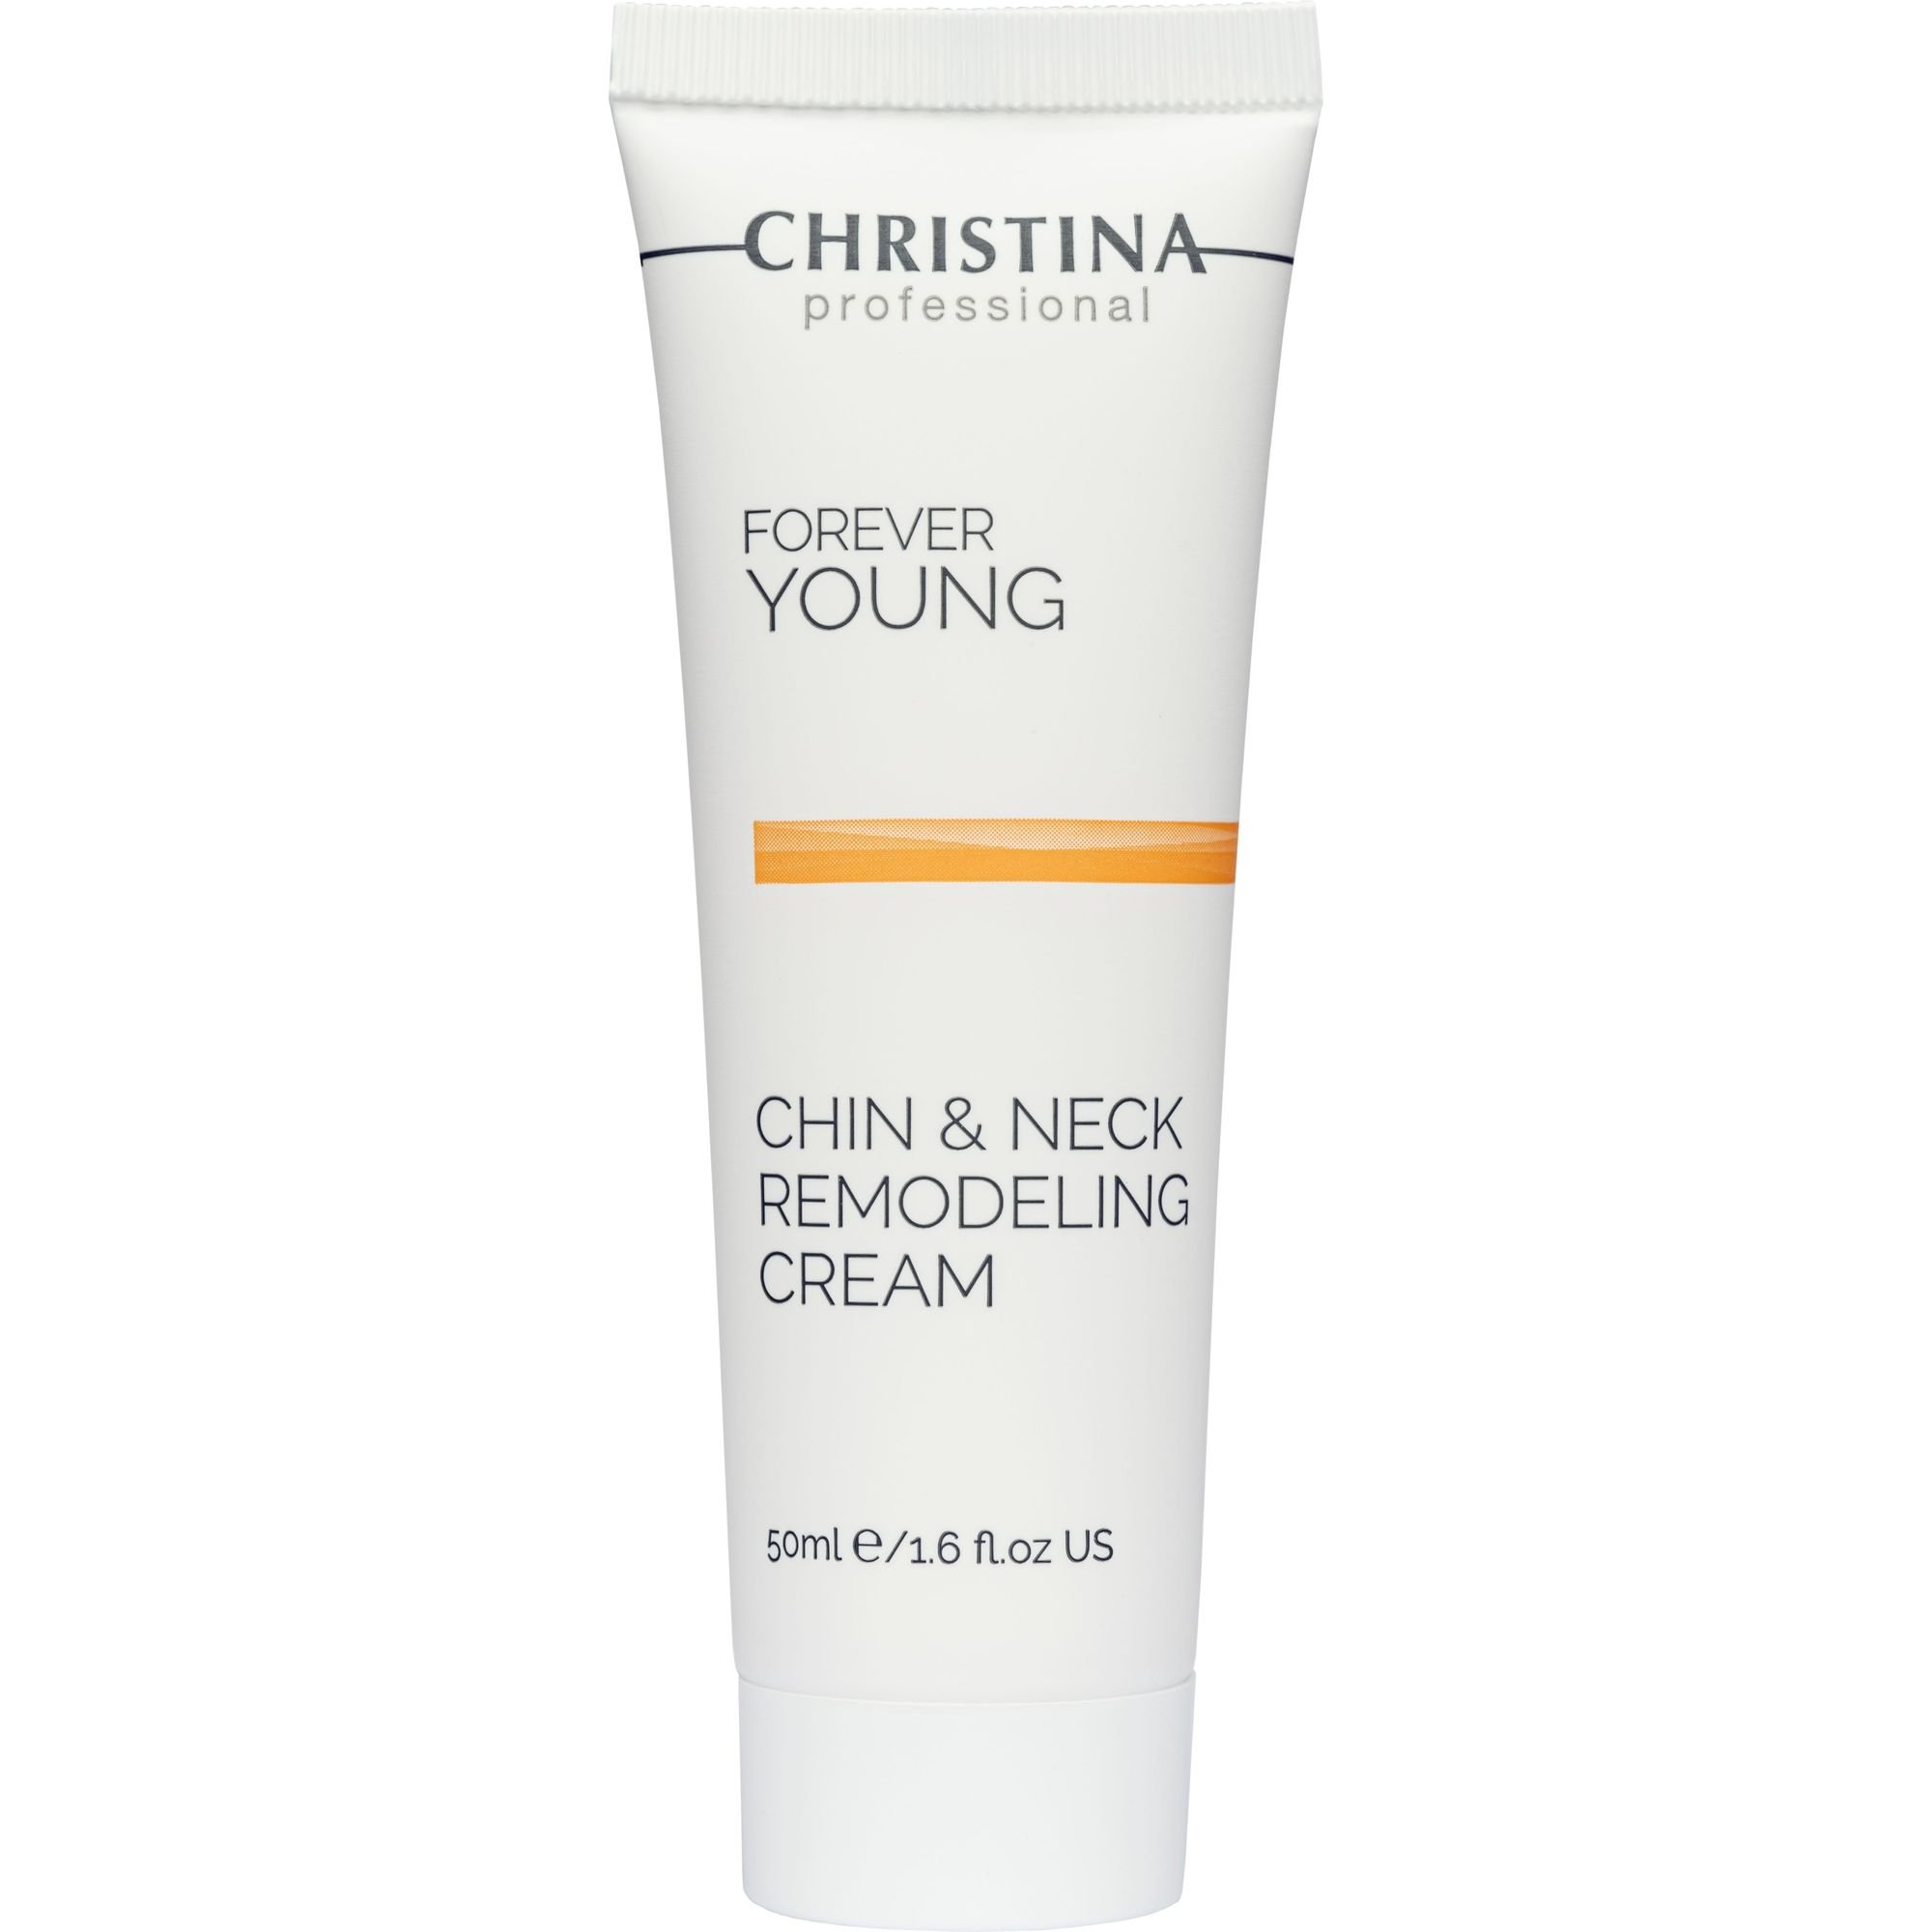 Набор Christina Forever Young Absolute Contour Kit: Absolute Contour Serum 30 мл + 3Luronic Serum 30 мл + Chin & Neck Remodeling Cream 50 мл - фото 6